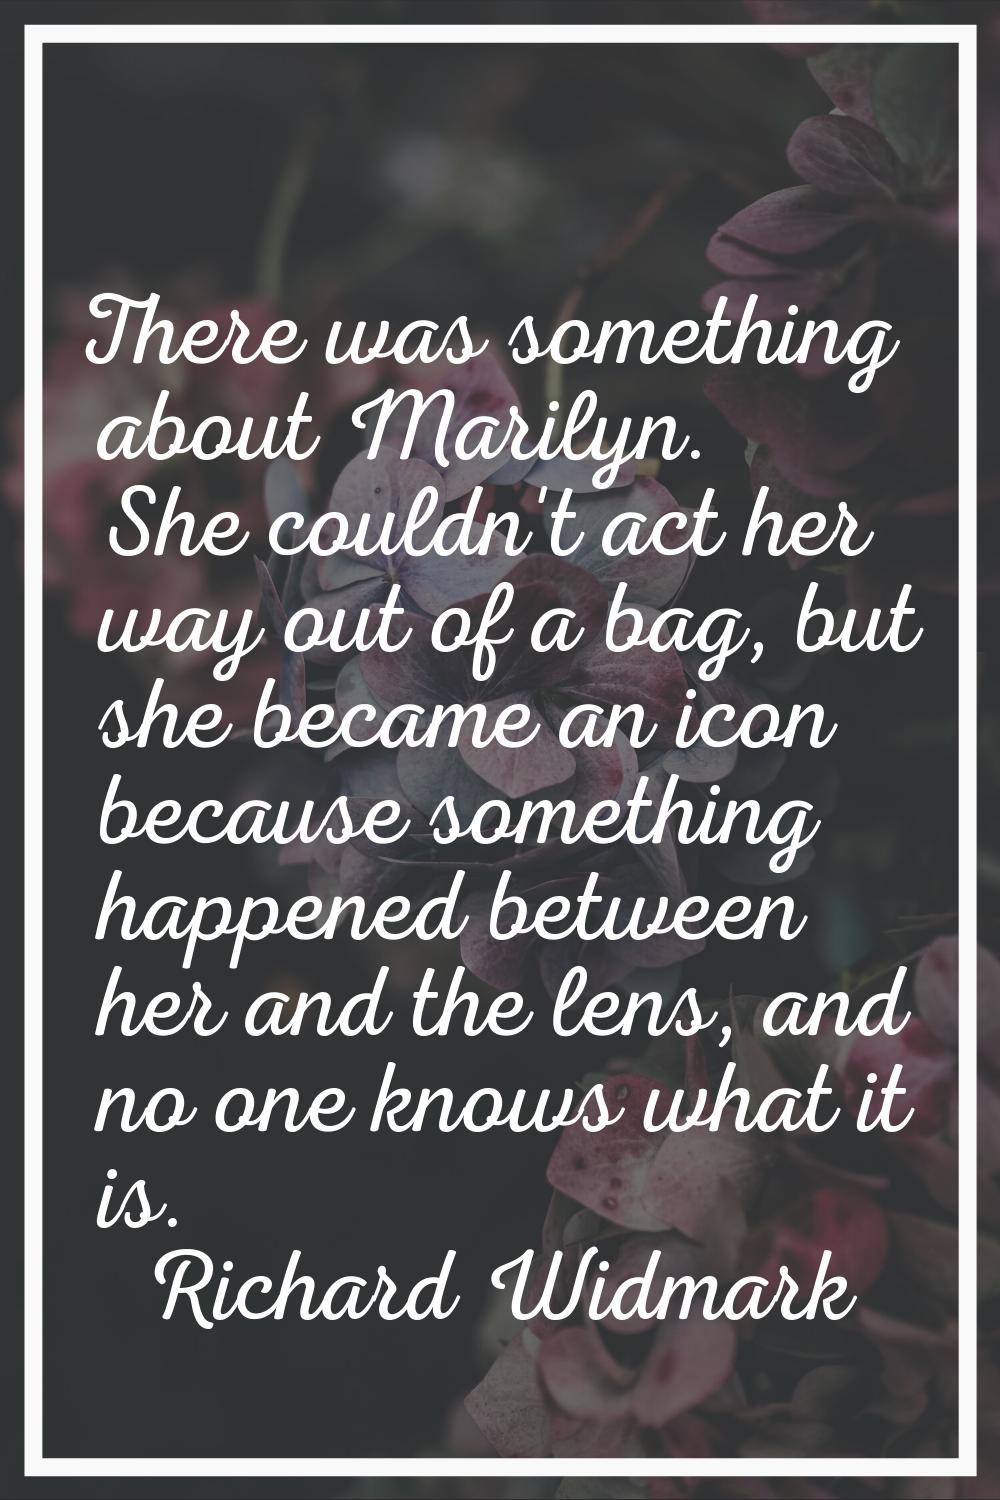 There was something about Marilyn. She couldn't act her way out of a bag, but she became an icon be